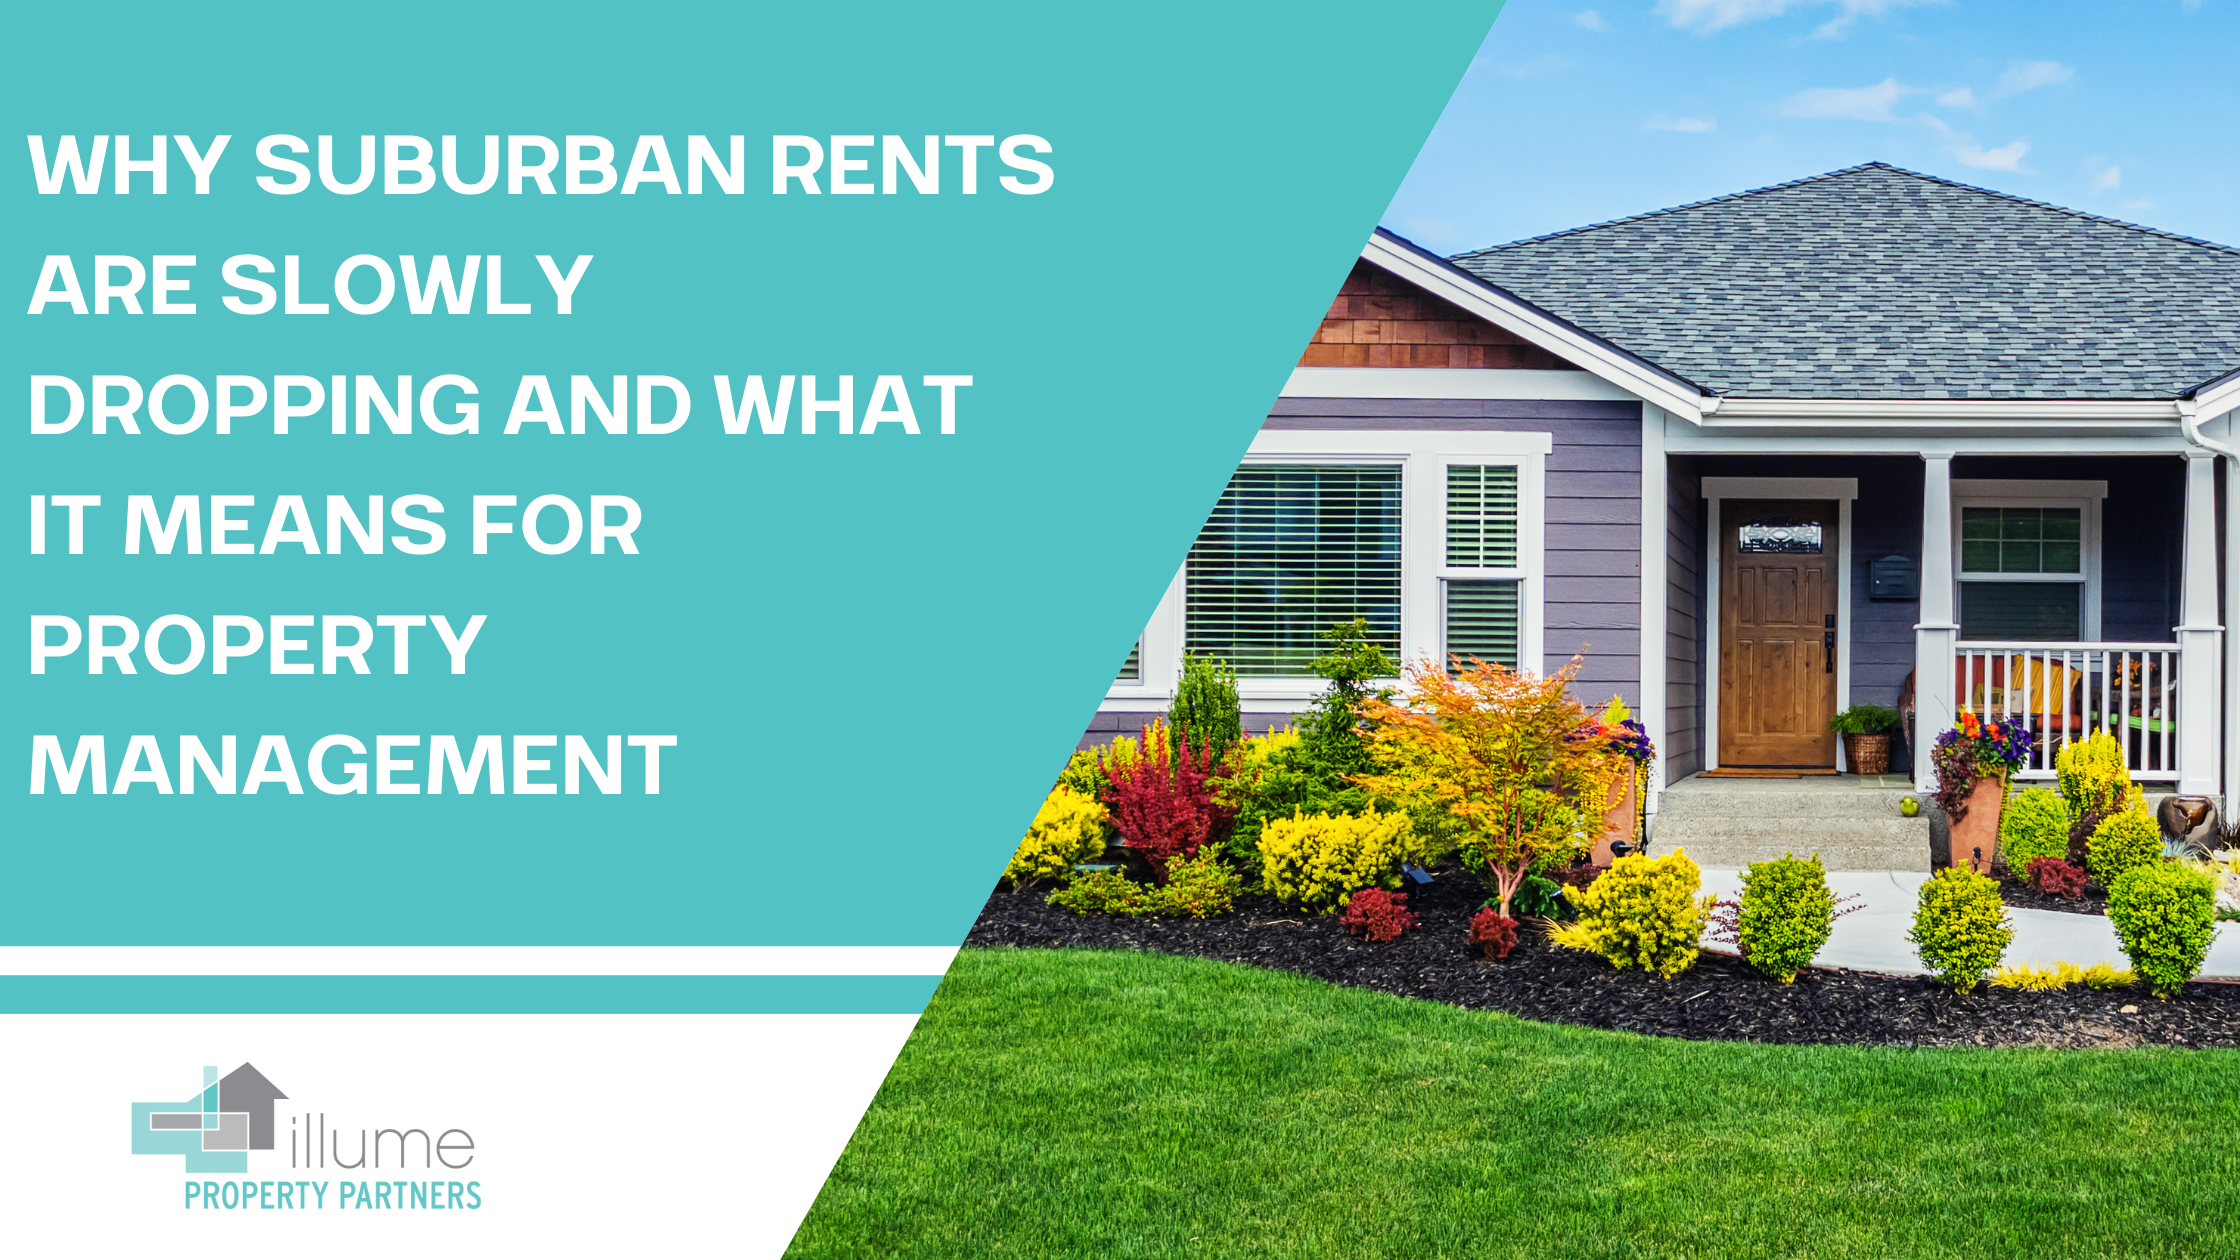 Why Suburban Rents are Slowly Dropping and What it Means for Property Management